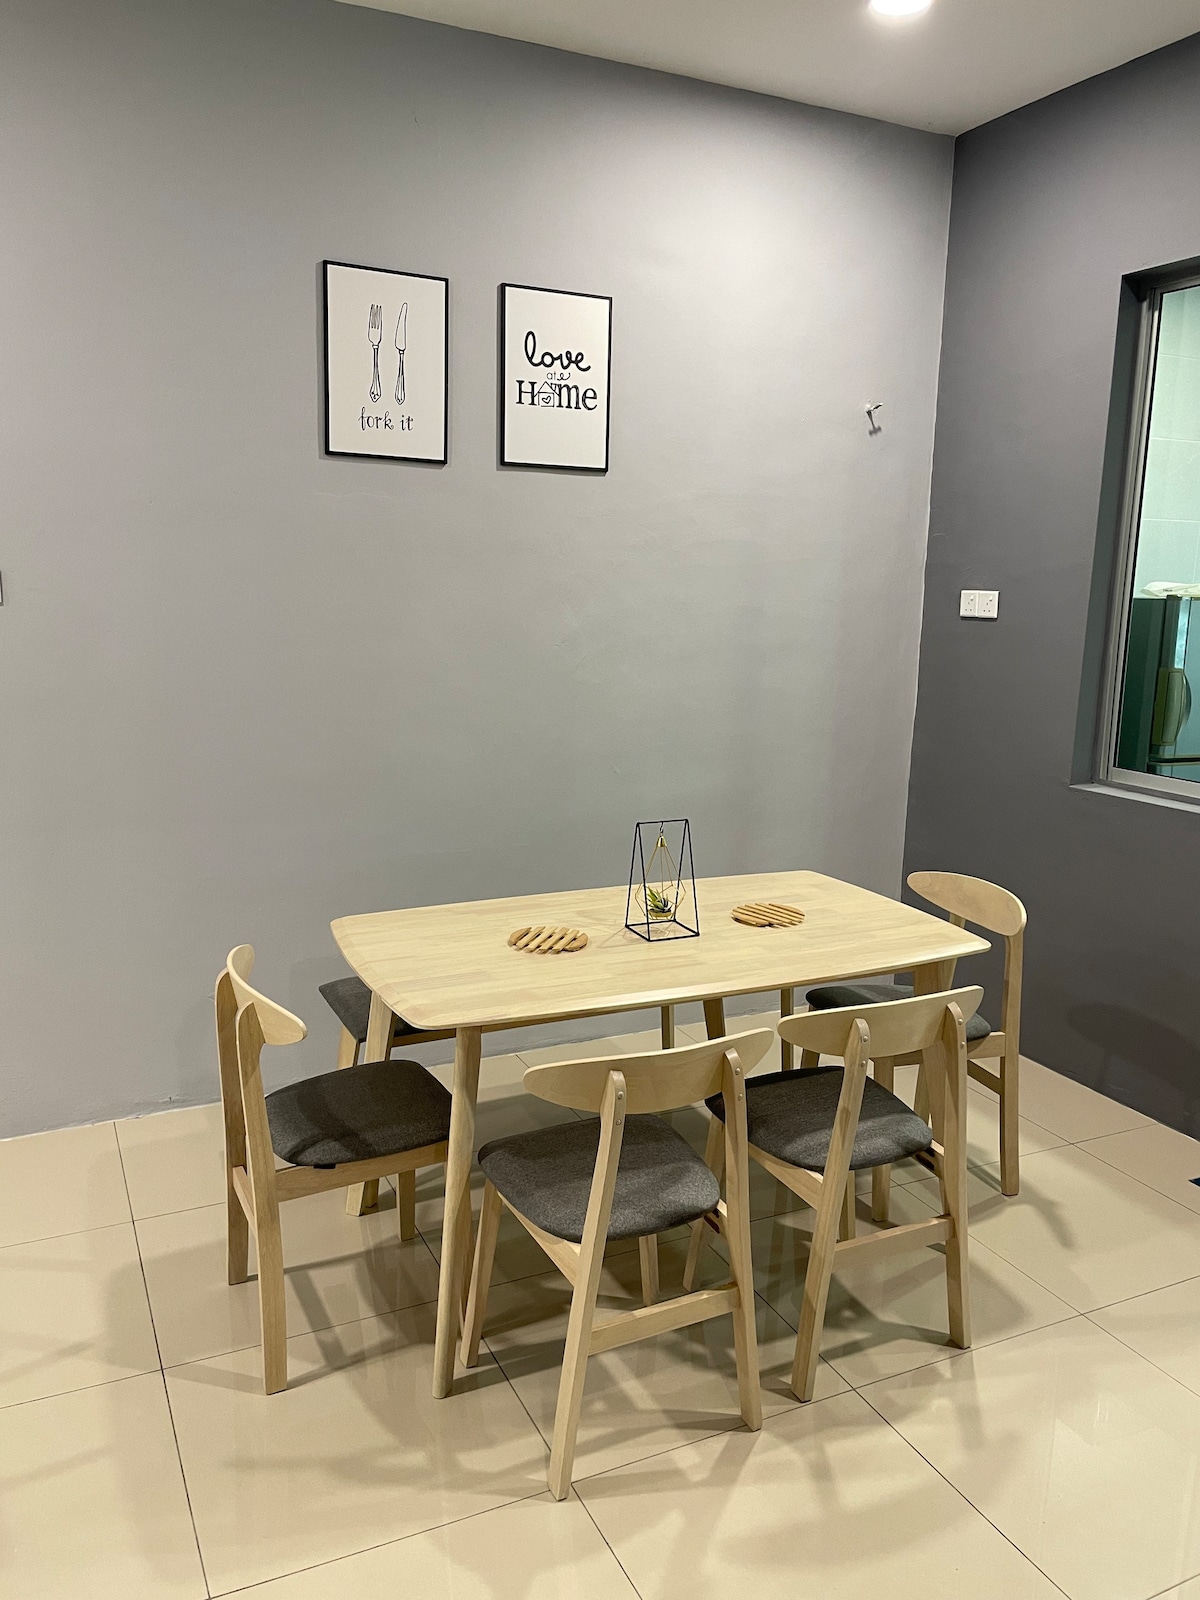 CozyRetreat by Jane-2.5storey in Ipoh （ 15人）